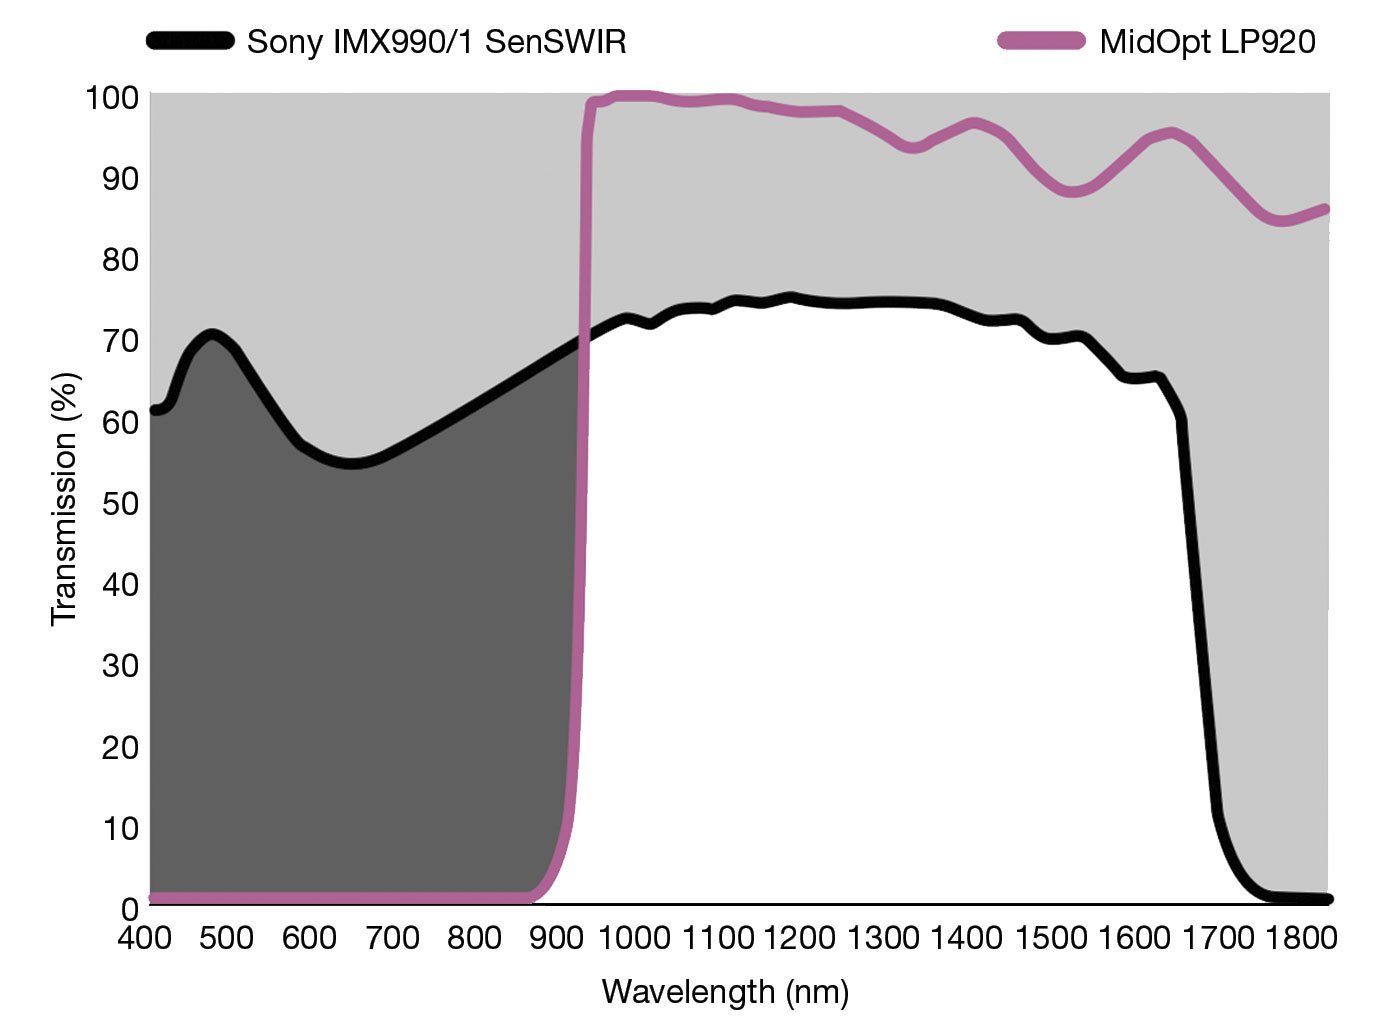 Figure 1. A MidOpt LP920 filter blocks the visible wavelengths and only allows SWIR to pass. The graphics depict the filter’s action on Sony’s new IMX990 and IMX991 SenSWIR sensors (top) and on quantum dot sensors (bottom). Courtesy of Midwest Optical Systems.